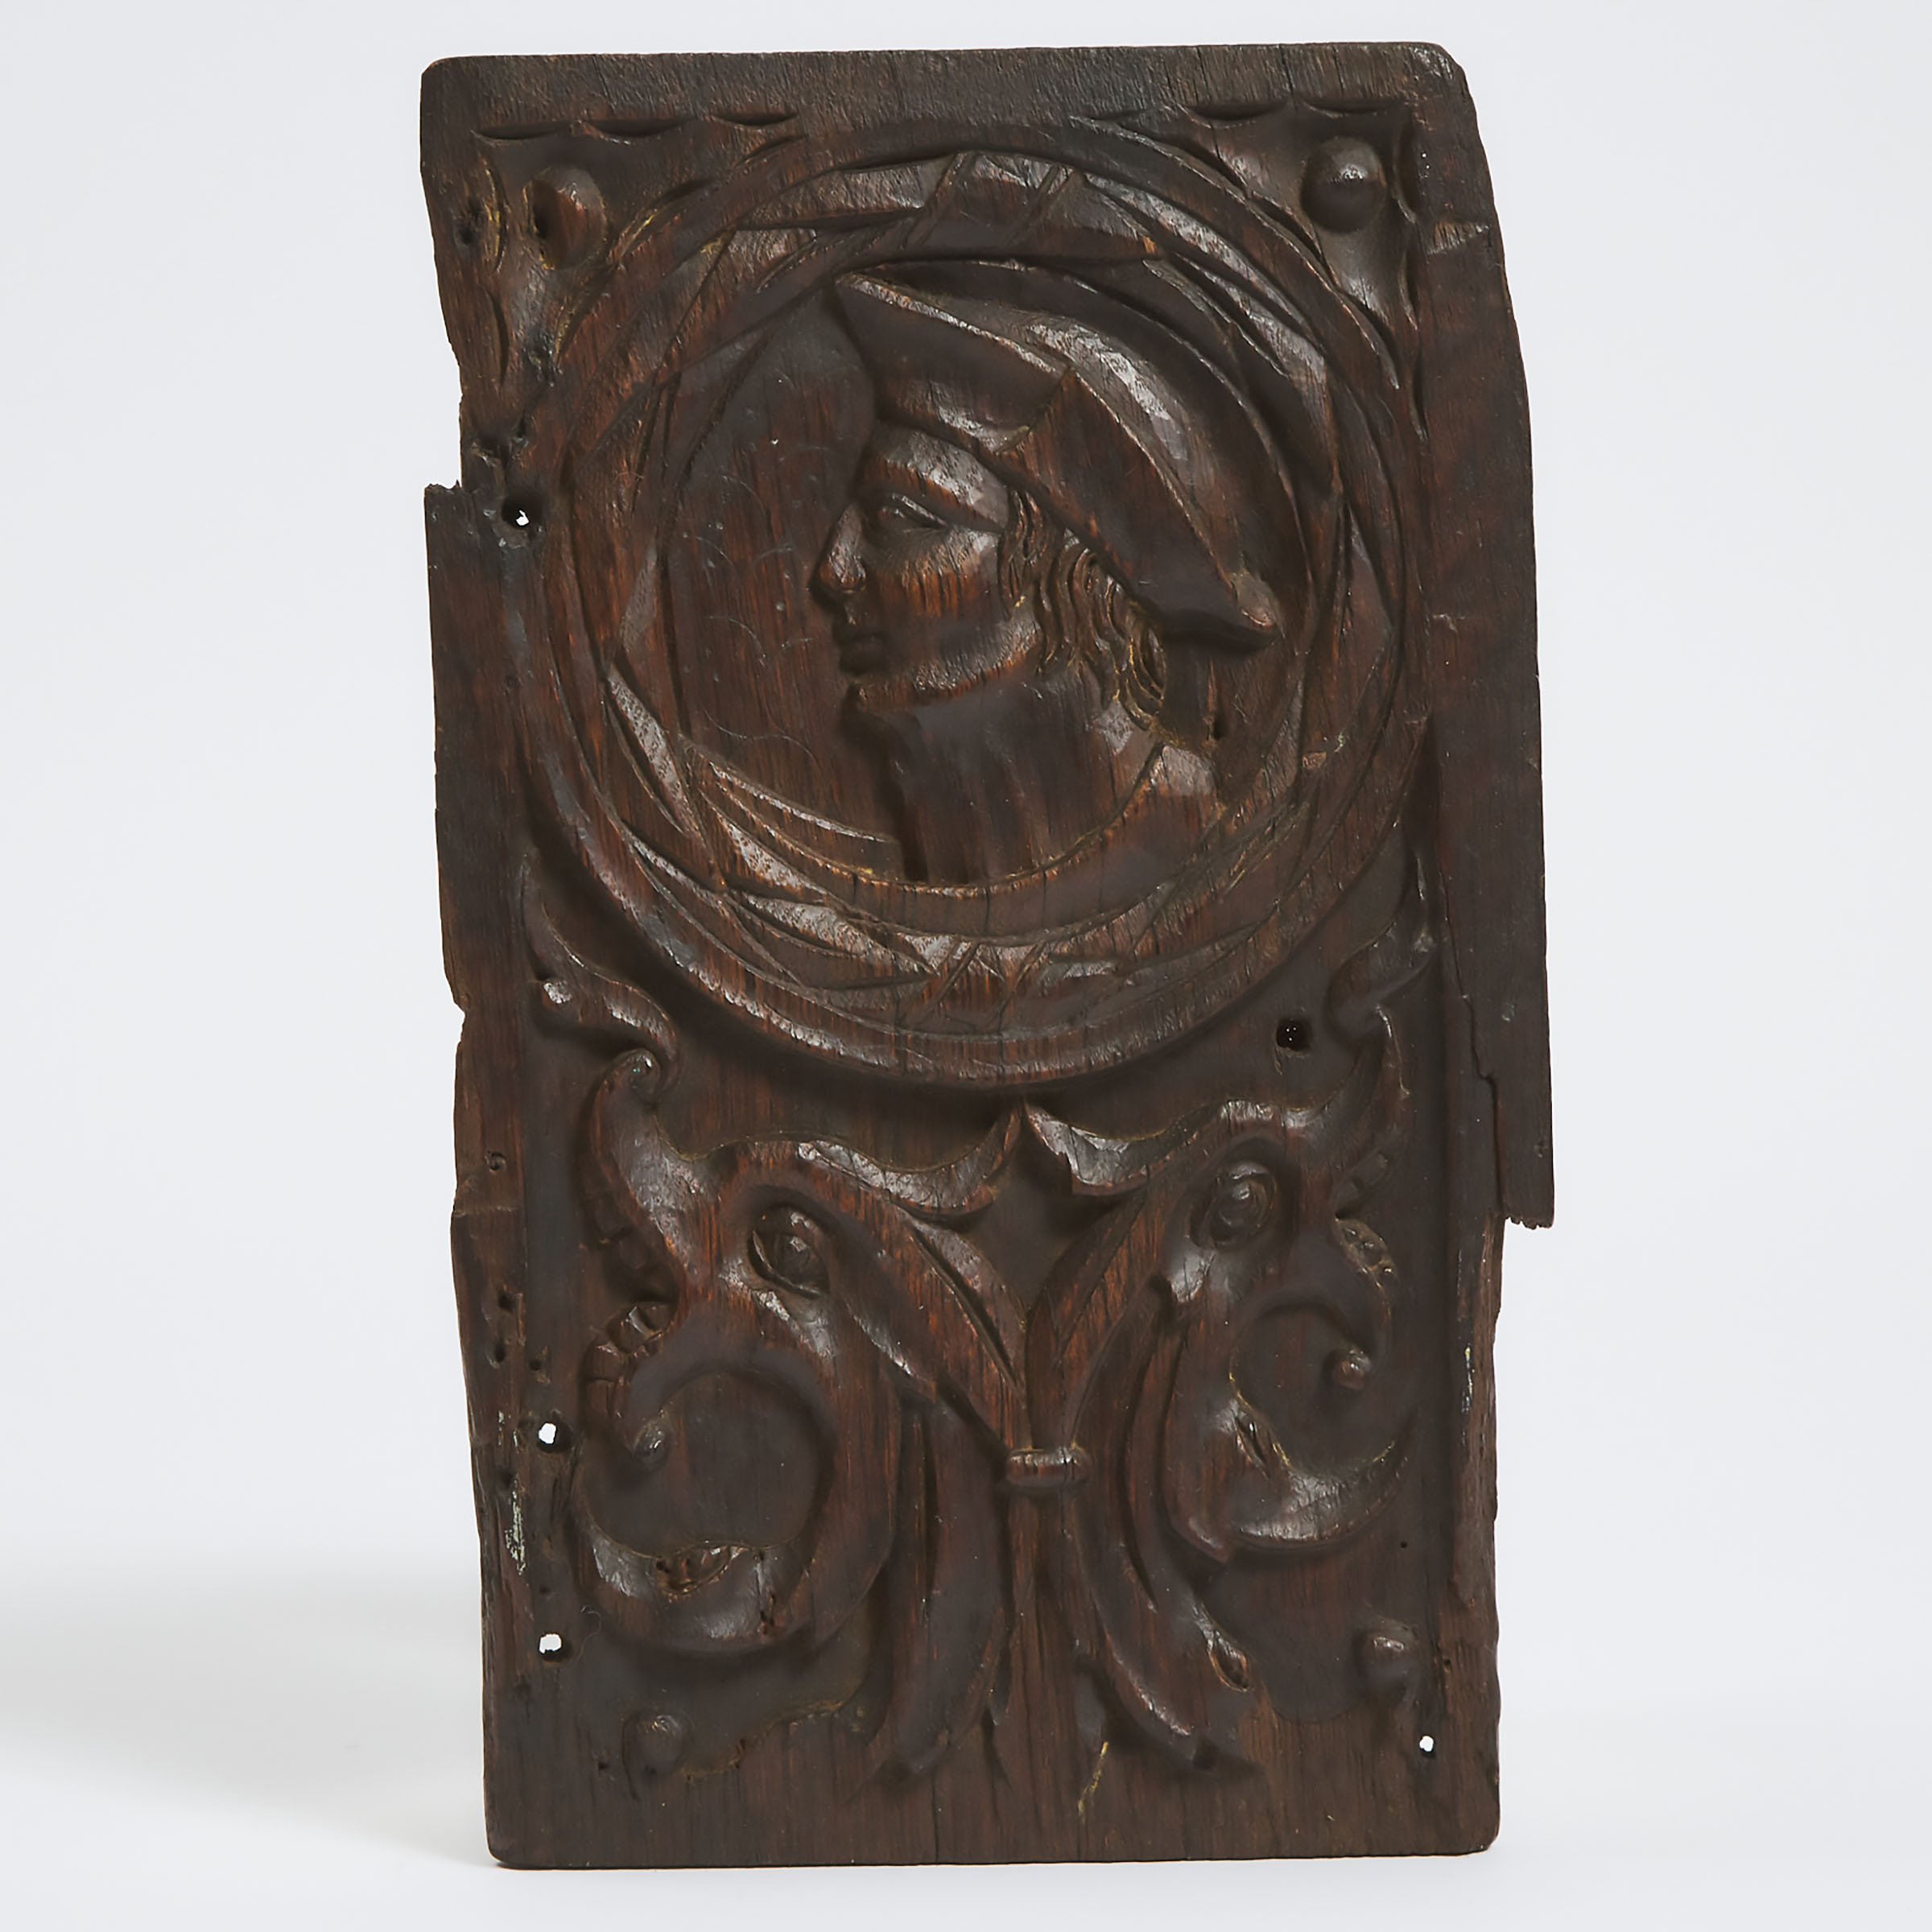 English Relief Carved Oak Romayne Panel, c.1530